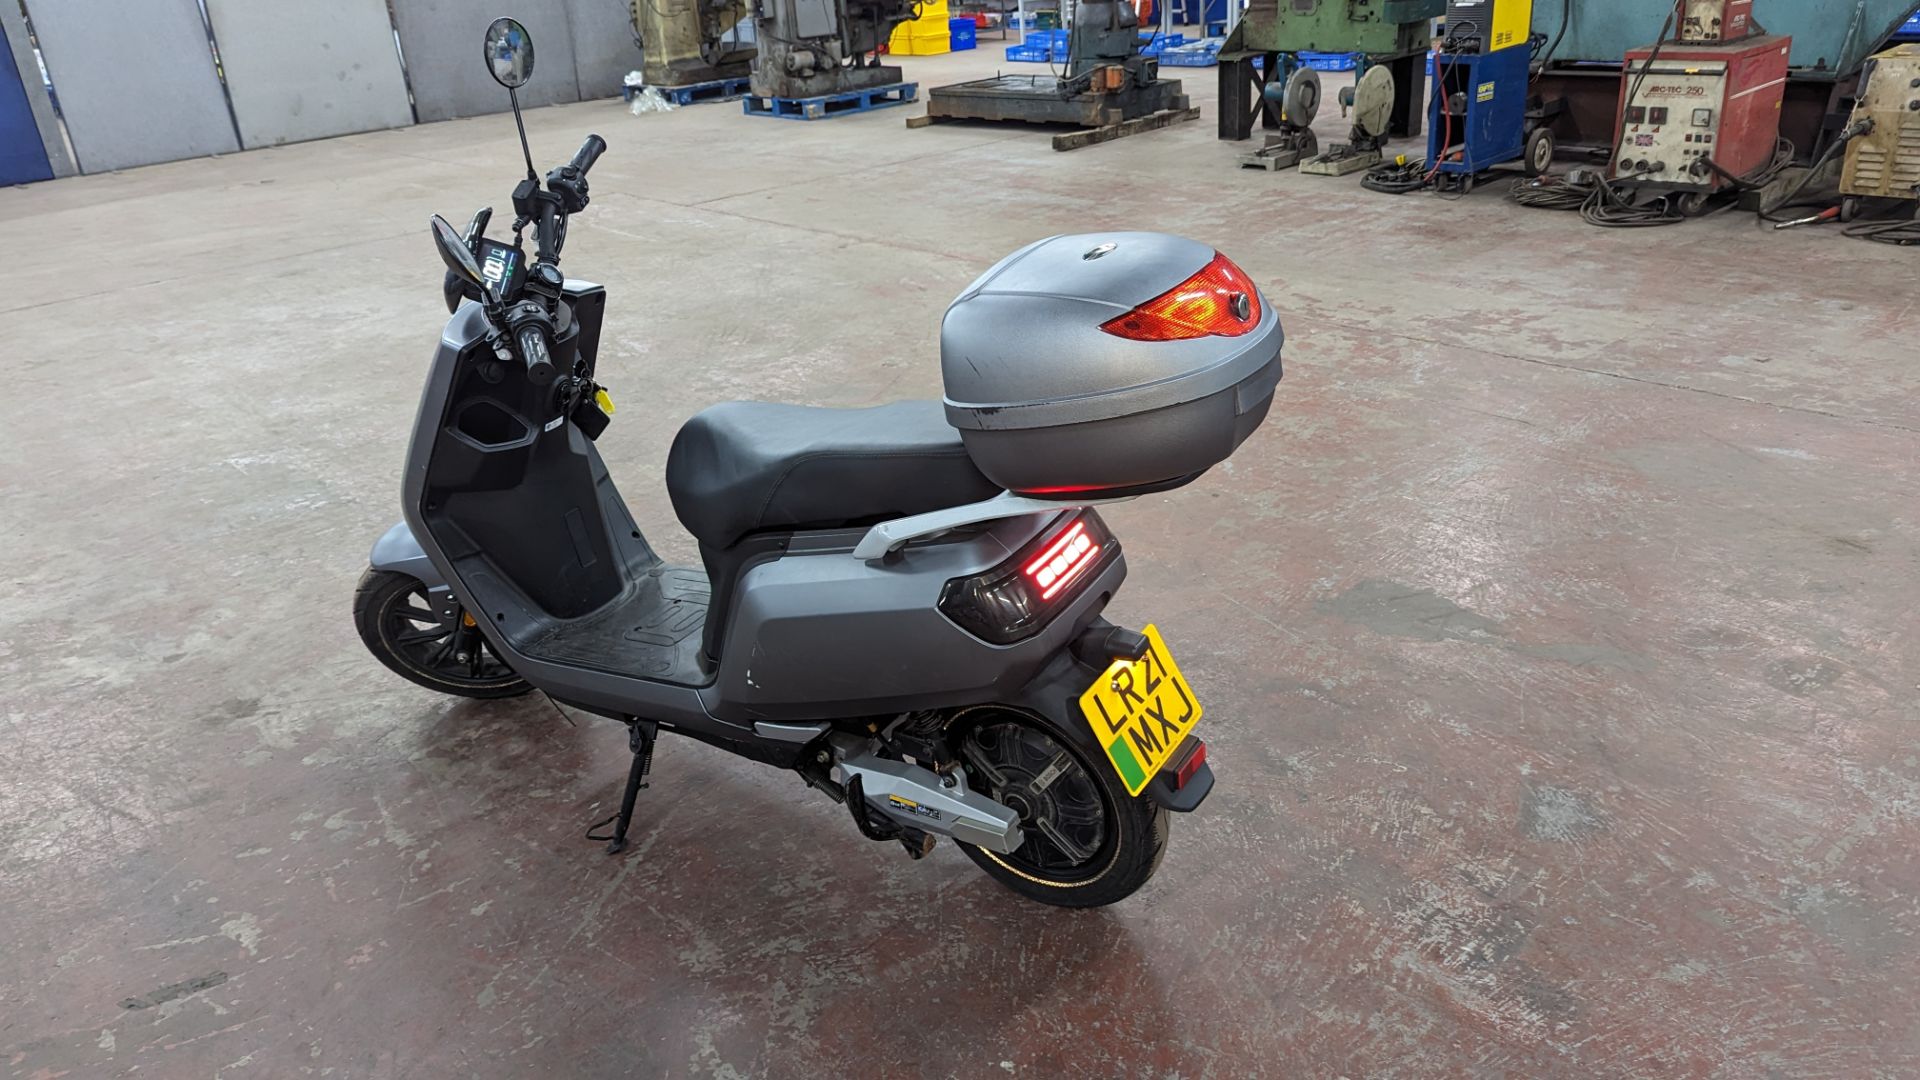 Senda 3000 Electric Moped: Silver/grey, 50cc equivalent, 30mph top speed. Complete with 2 keys to - Image 3 of 13